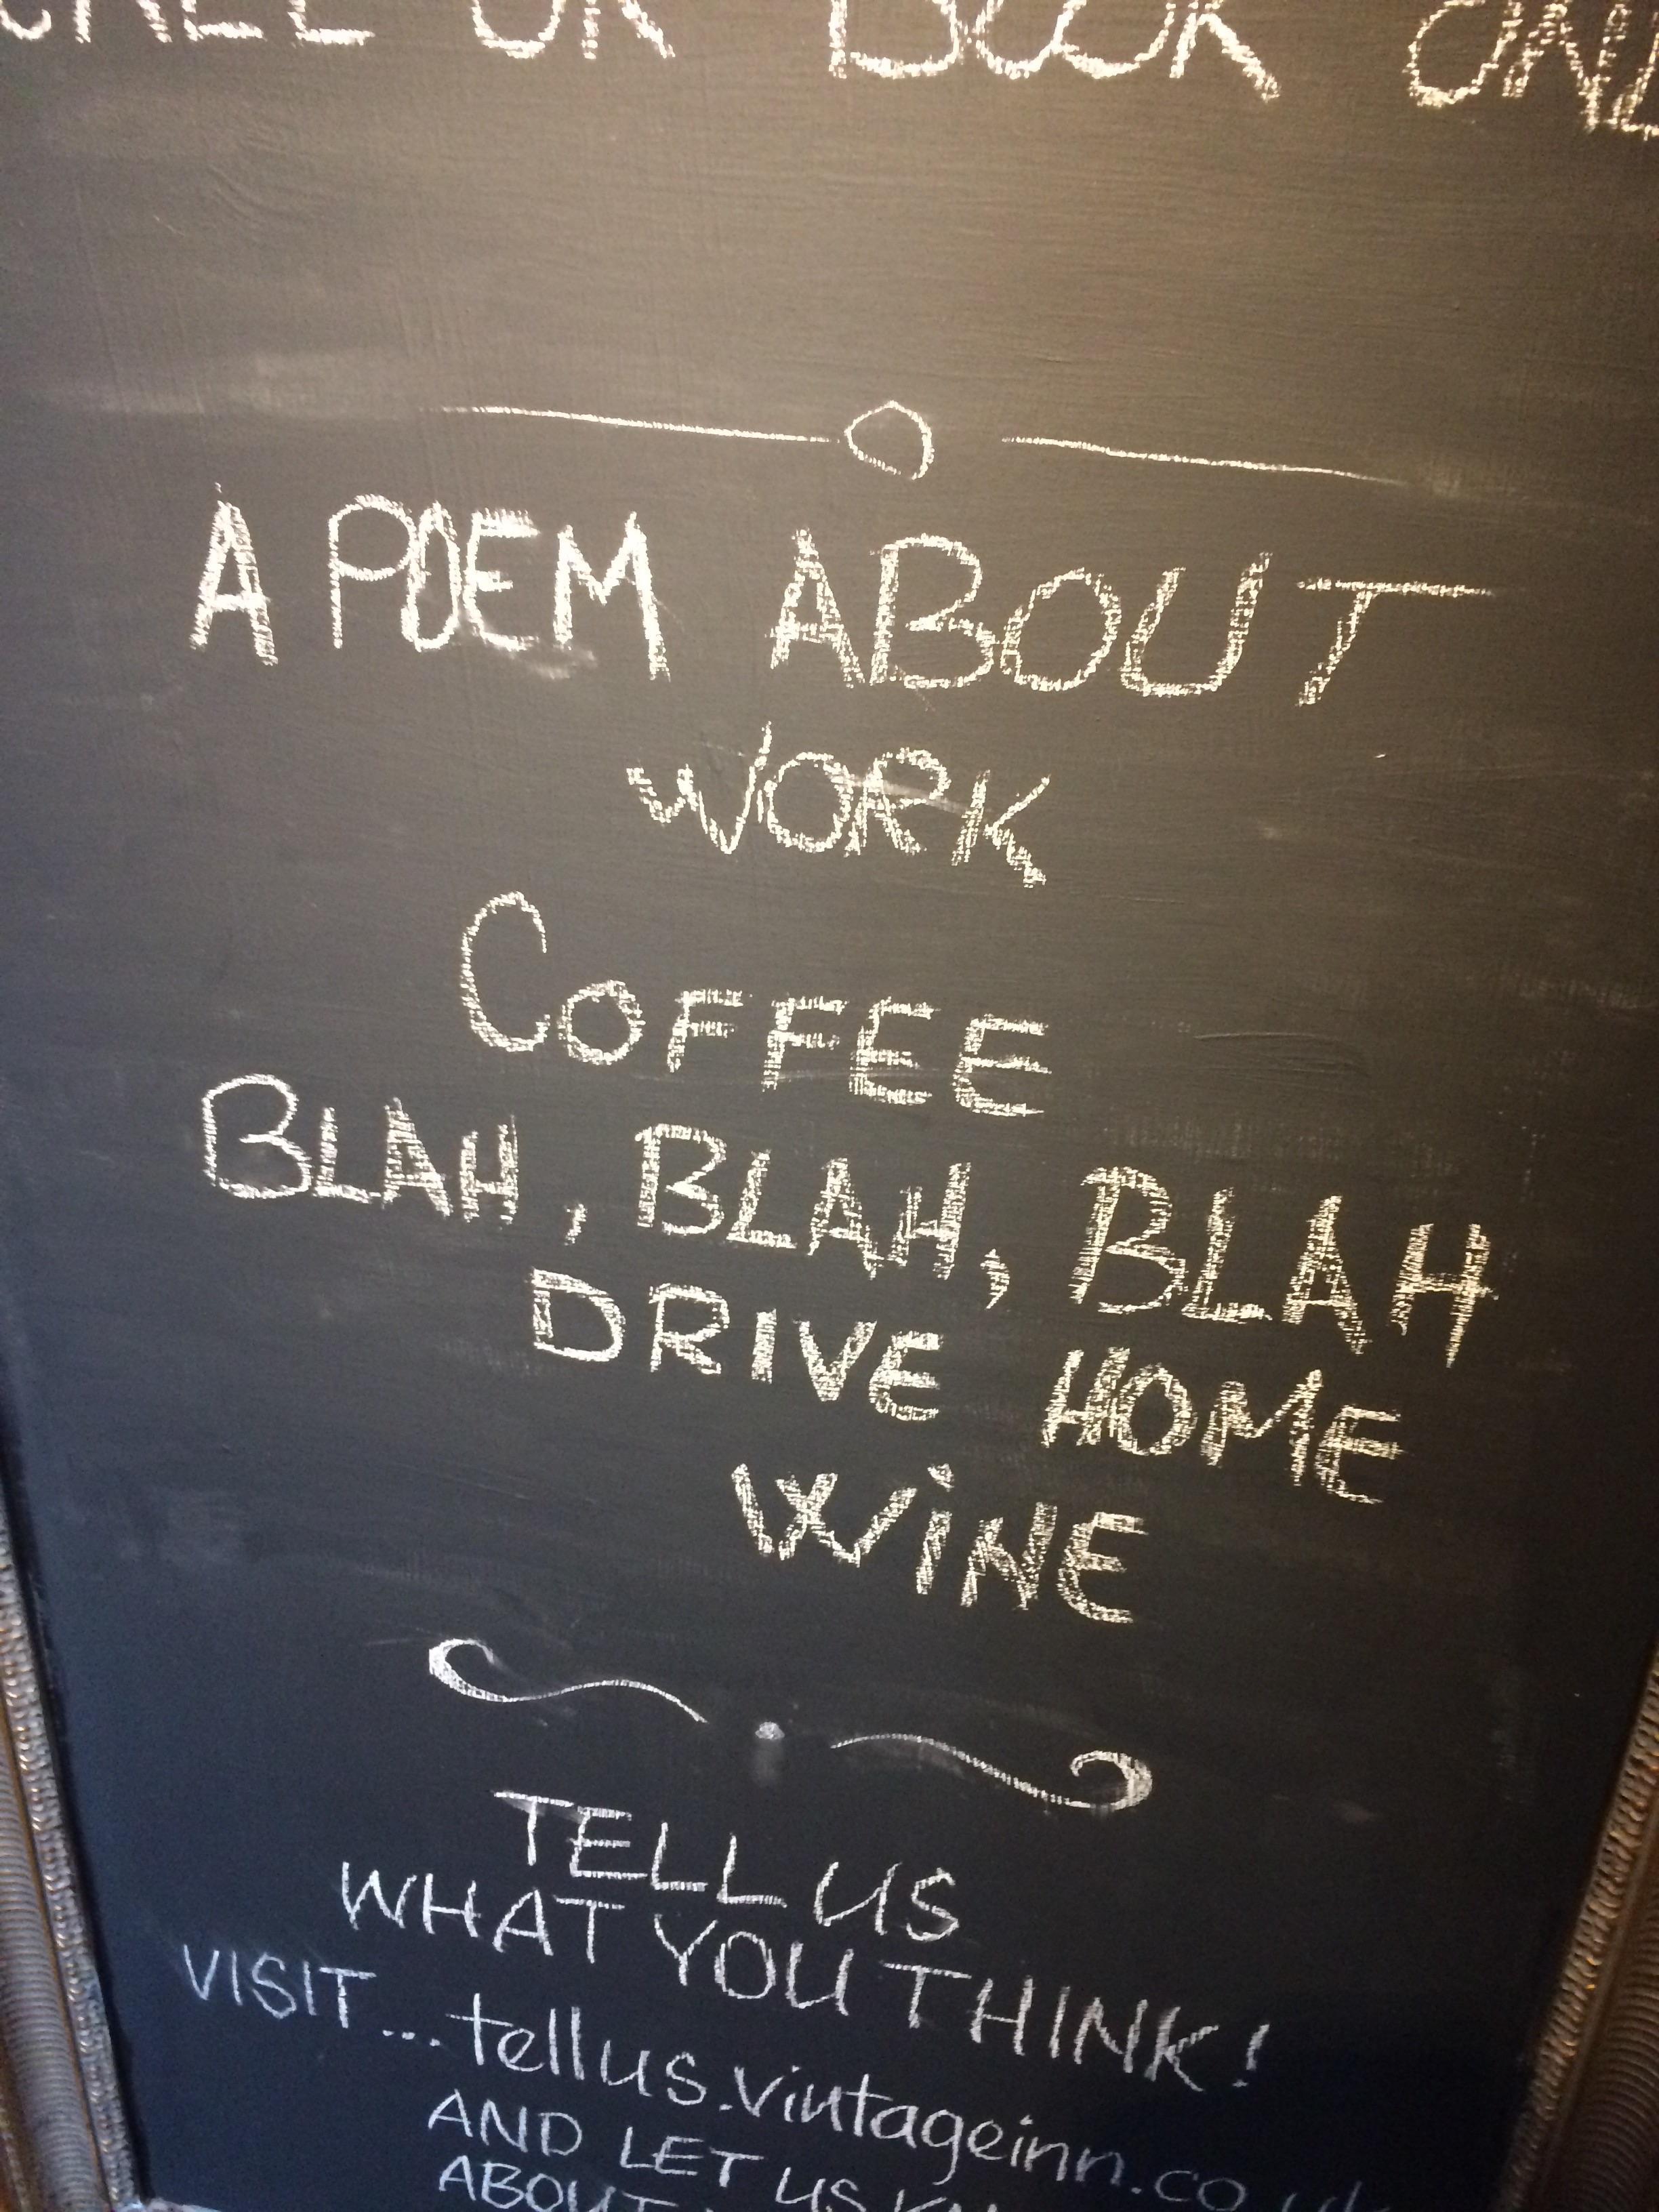 A poem about work